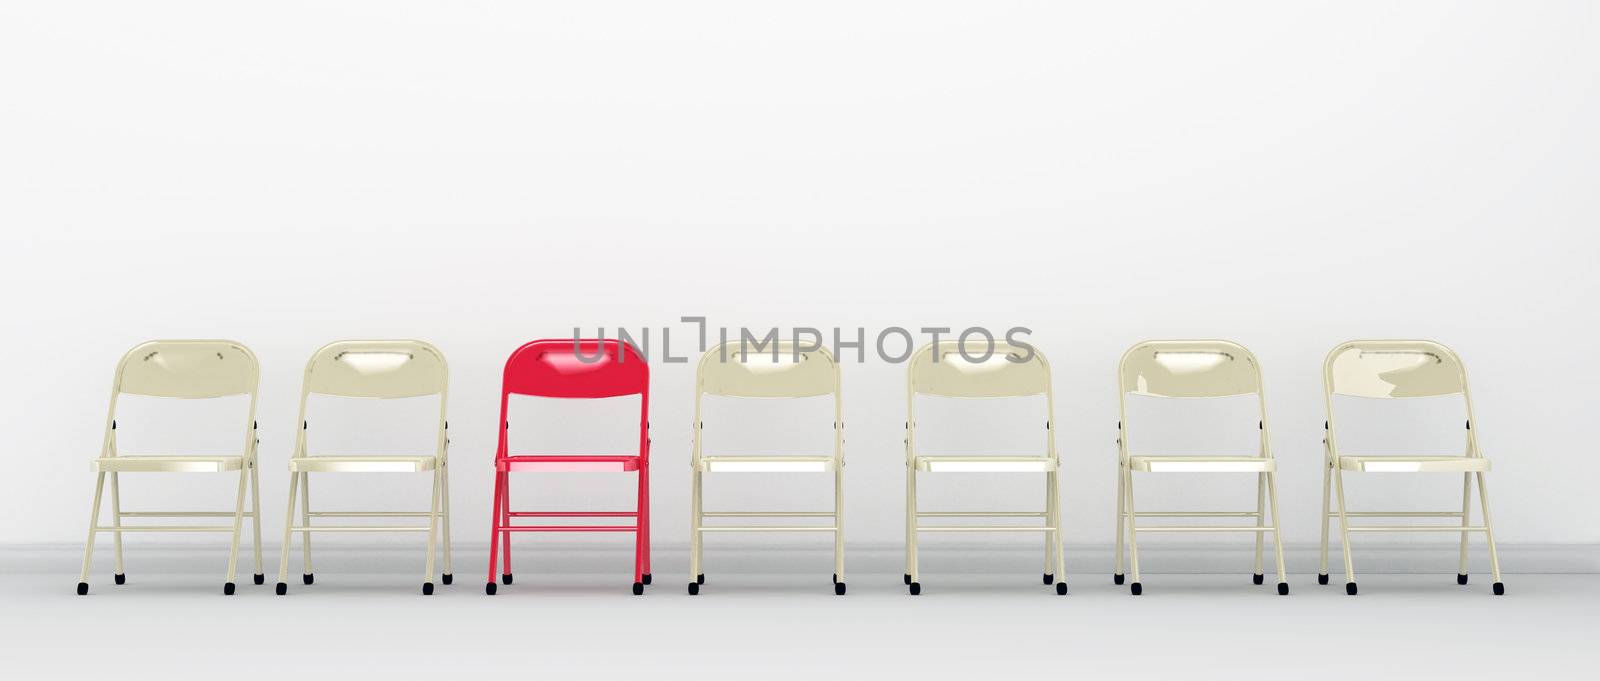 Standing out among others. Red chair standing out in a row of other chairs against a white wall